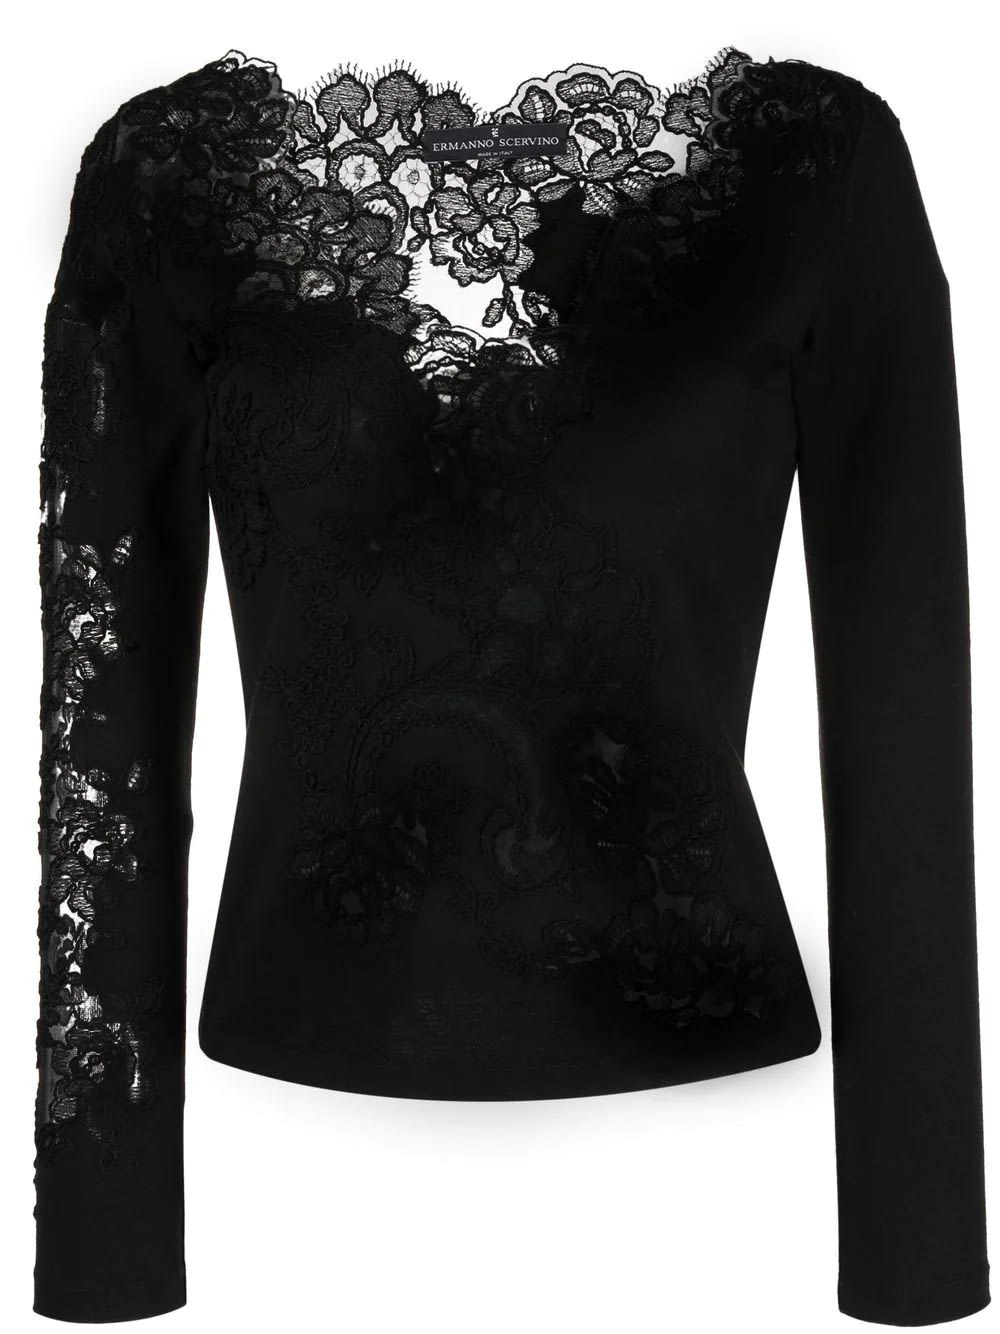 Ermanno Scervino Black Long Sleeve T-shirt With Lace